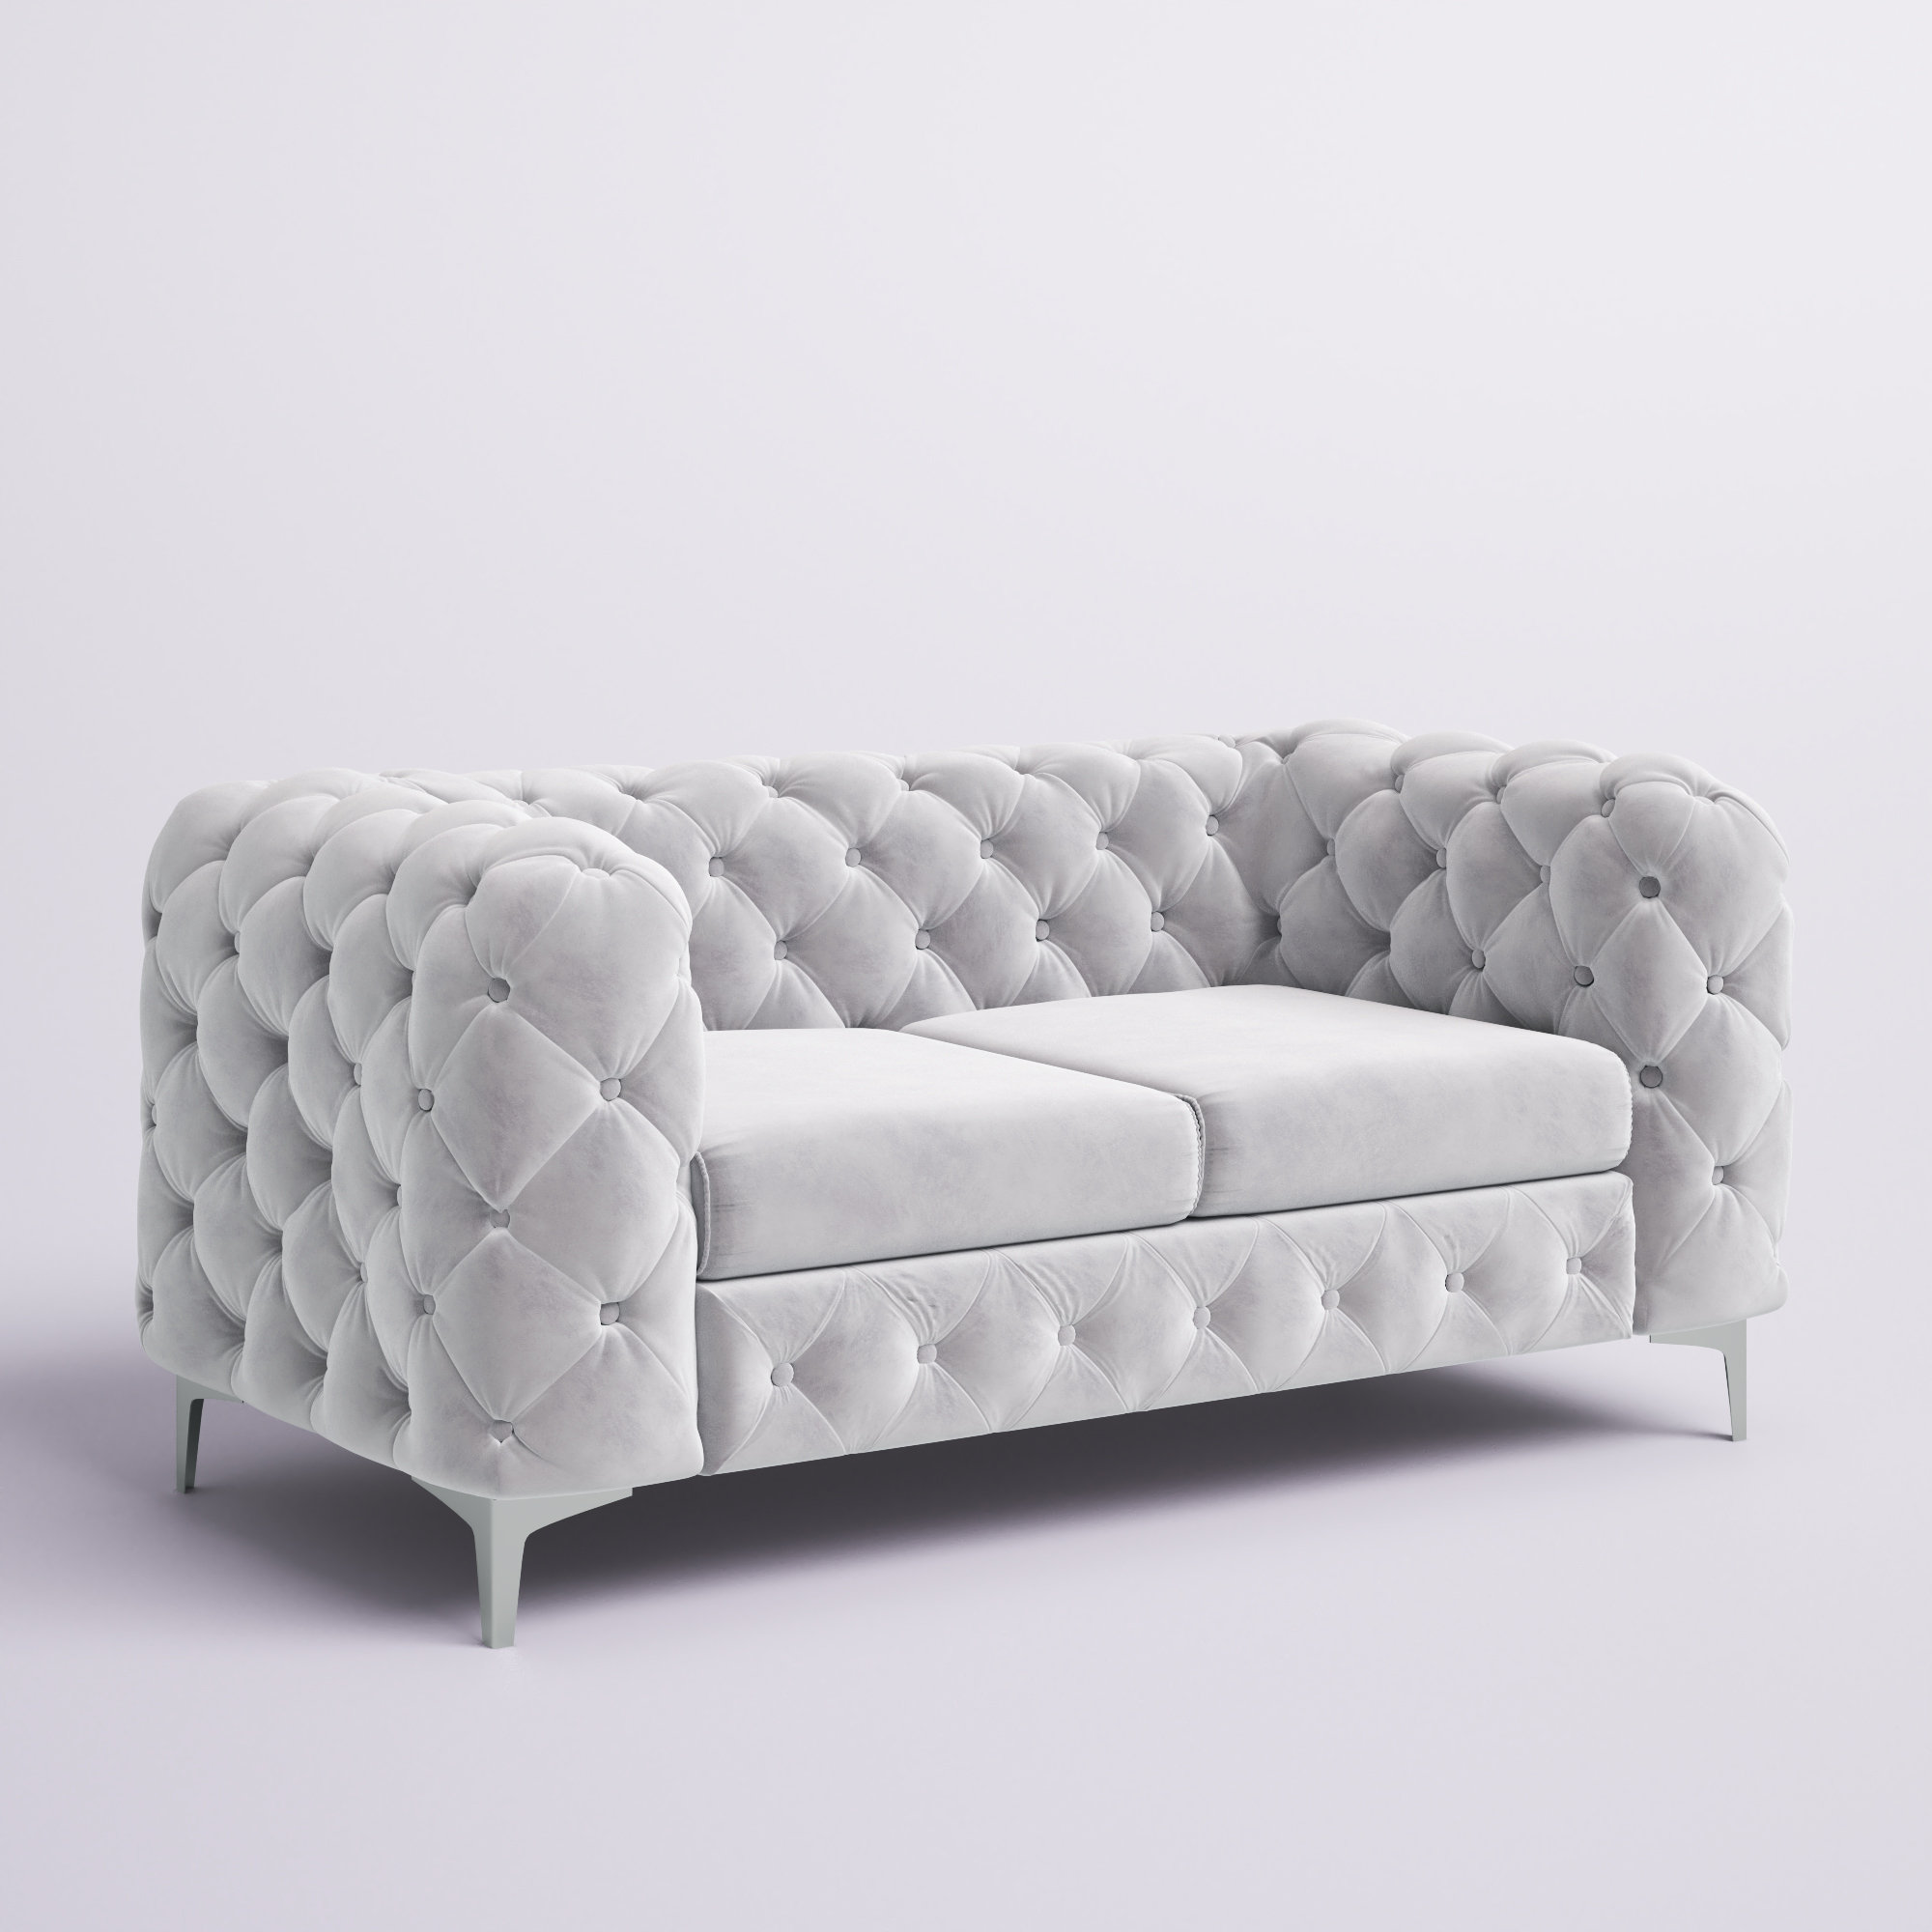 Grey Velvet Sofa 2 Seater Loveseat 6 colours Como FREE NEXT DAY DELIVERY 